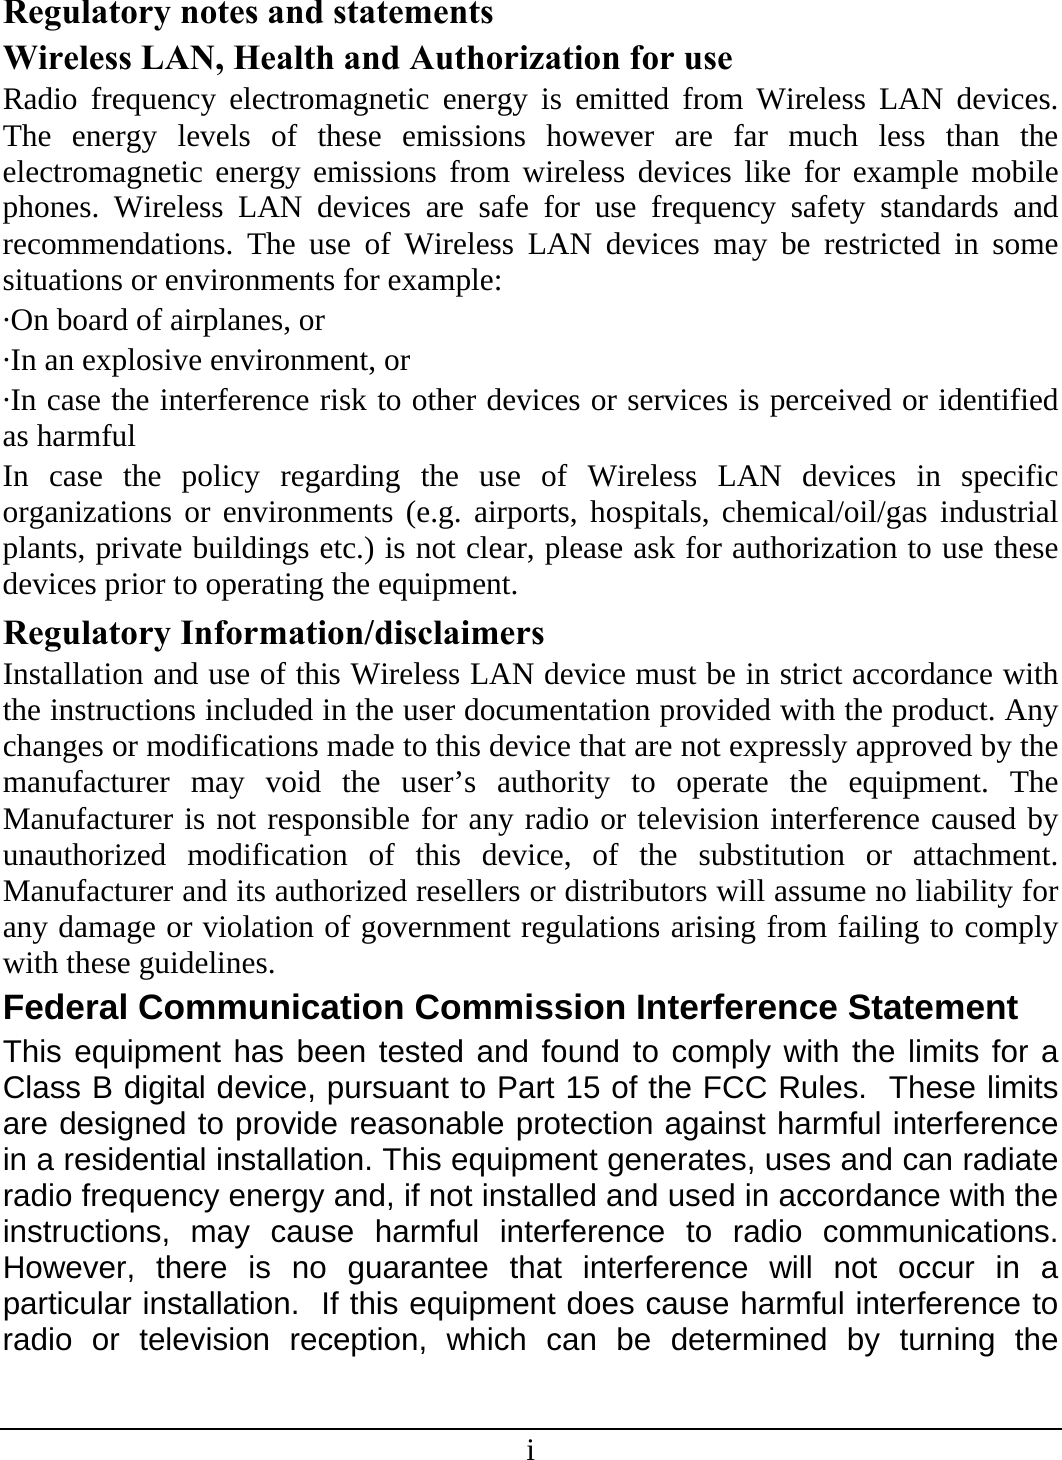 i Regulatory notes and statements Wireless LAN, Health and Authorization for use Radio frequency electromagnetic energy is emitted from Wireless LAN devices. The energy levels of these emissions however are far much less than the electromagnetic energy emissions from wireless devices like for example mobile phones. Wireless LAN devices are safe for use frequency safety standards and recommendations. The use of Wireless LAN devices may be restricted in some situations or environments for example: ·On board of airplanes, or ·In an explosive environment, or ·In case the interference risk to other devices or services is perceived or identified as harmful In case the policy regarding the use of Wireless LAN devices in specific organizations or environments (e.g. airports, hospitals, chemical/oil/gas industrial plants, private buildings etc.) is not clear, please ask for authorization to use these devices prior to operating the equipment. Regulatory Information/disclaimers Installation and use of this Wireless LAN device must be in strict accordance with the instructions included in the user documentation provided with the product. Any changes or modifications made to this device that are not expressly approved by the manufacturer may void the user’s authority to operate the equipment. The Manufacturer is not responsible for any radio or television interference caused by unauthorized modification of this device, of the substitution or attachment. Manufacturer and its authorized resellers or distributors will assume no liability for any damage or violation of government regulations arising from failing to comply with these guidelines. Federal Communication Commission Interference Statement This equipment has been tested and found to comply with the limits for a Class B digital device, pursuant to Part 15 of the FCC Rules.  These limits are designed to provide reasonable protection against harmful interference in a residential installation. This equipment generates, uses and can radiate radio frequency energy and, if not installed and used in accordance with the instructions, may cause harmful interference to radio communications.  However, there is no guarantee that interference will not occur in a particular installation.  If this equipment does cause harmful interference to radio or television reception, which can be determined by turning the 